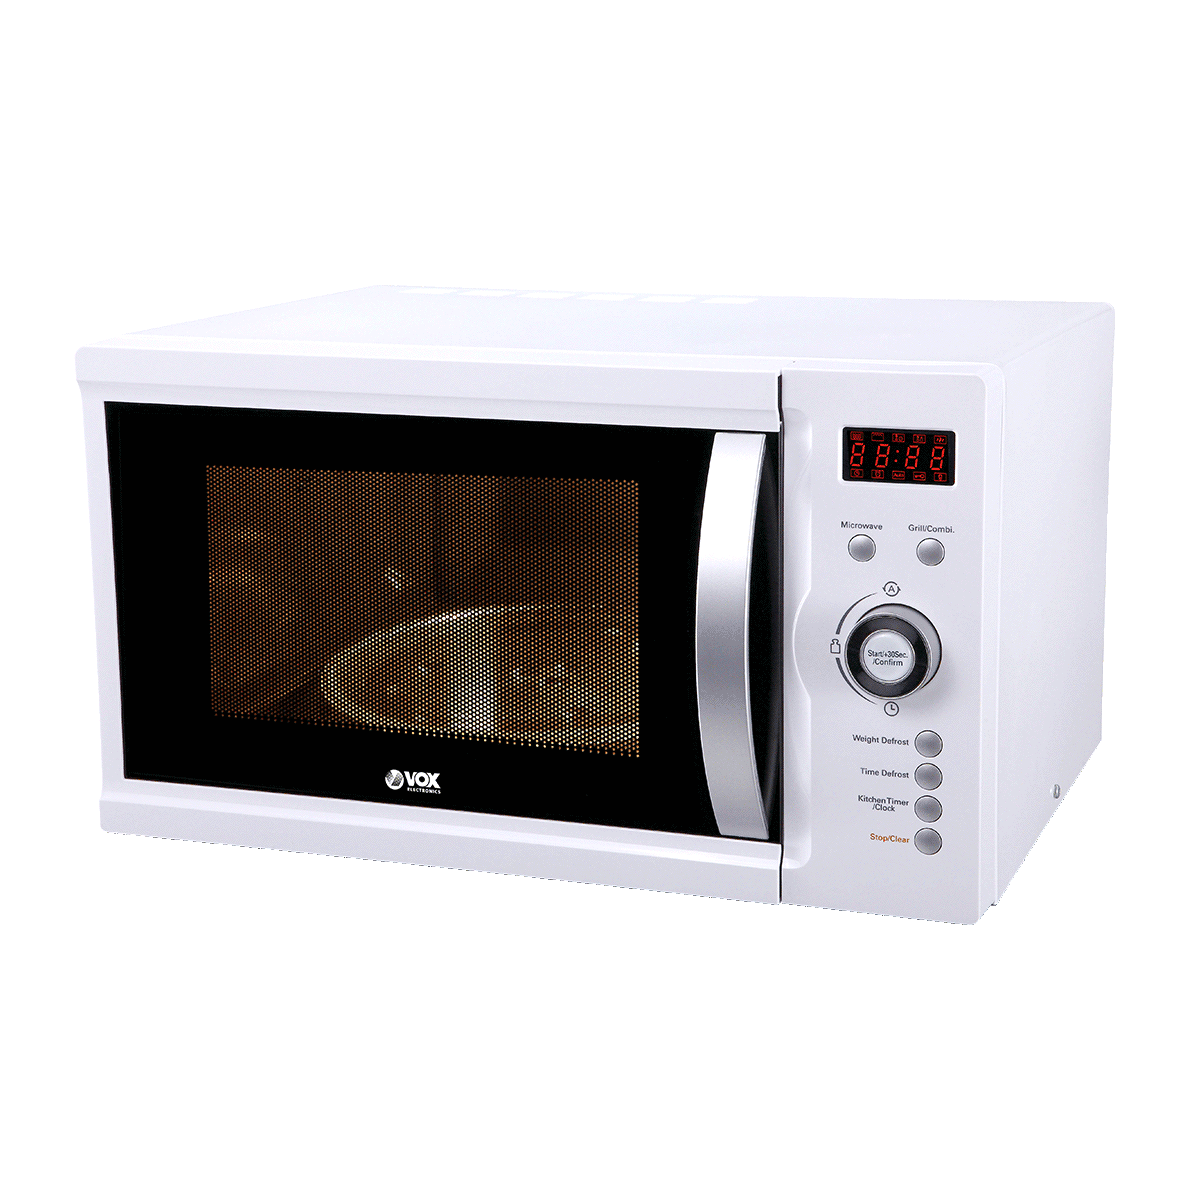 Built-in microwave oven MWH-GD23W 